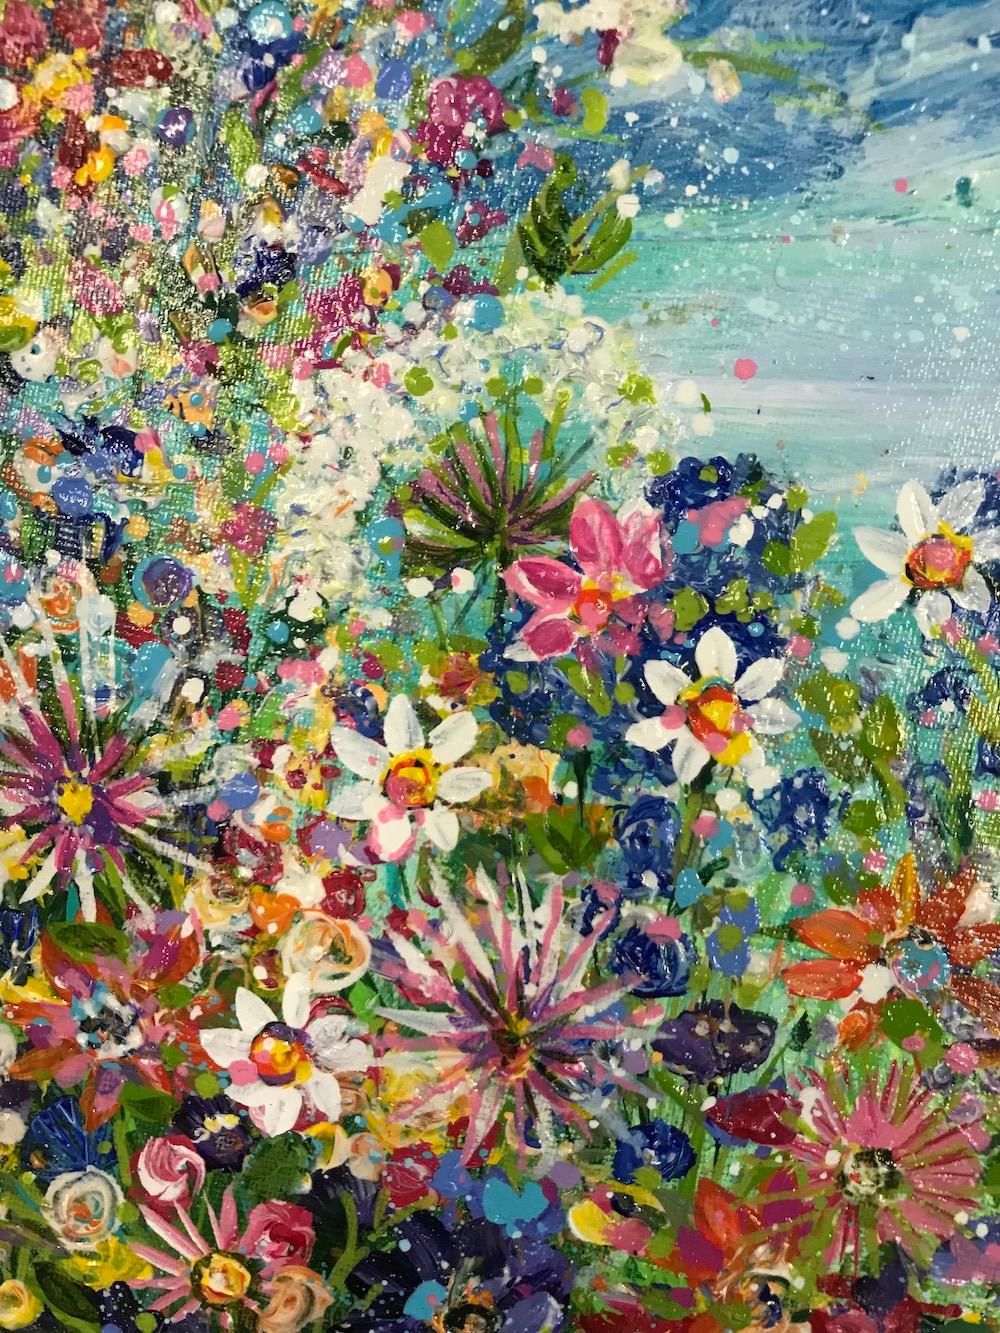 Floral Joy - Painting by Jan Rogers